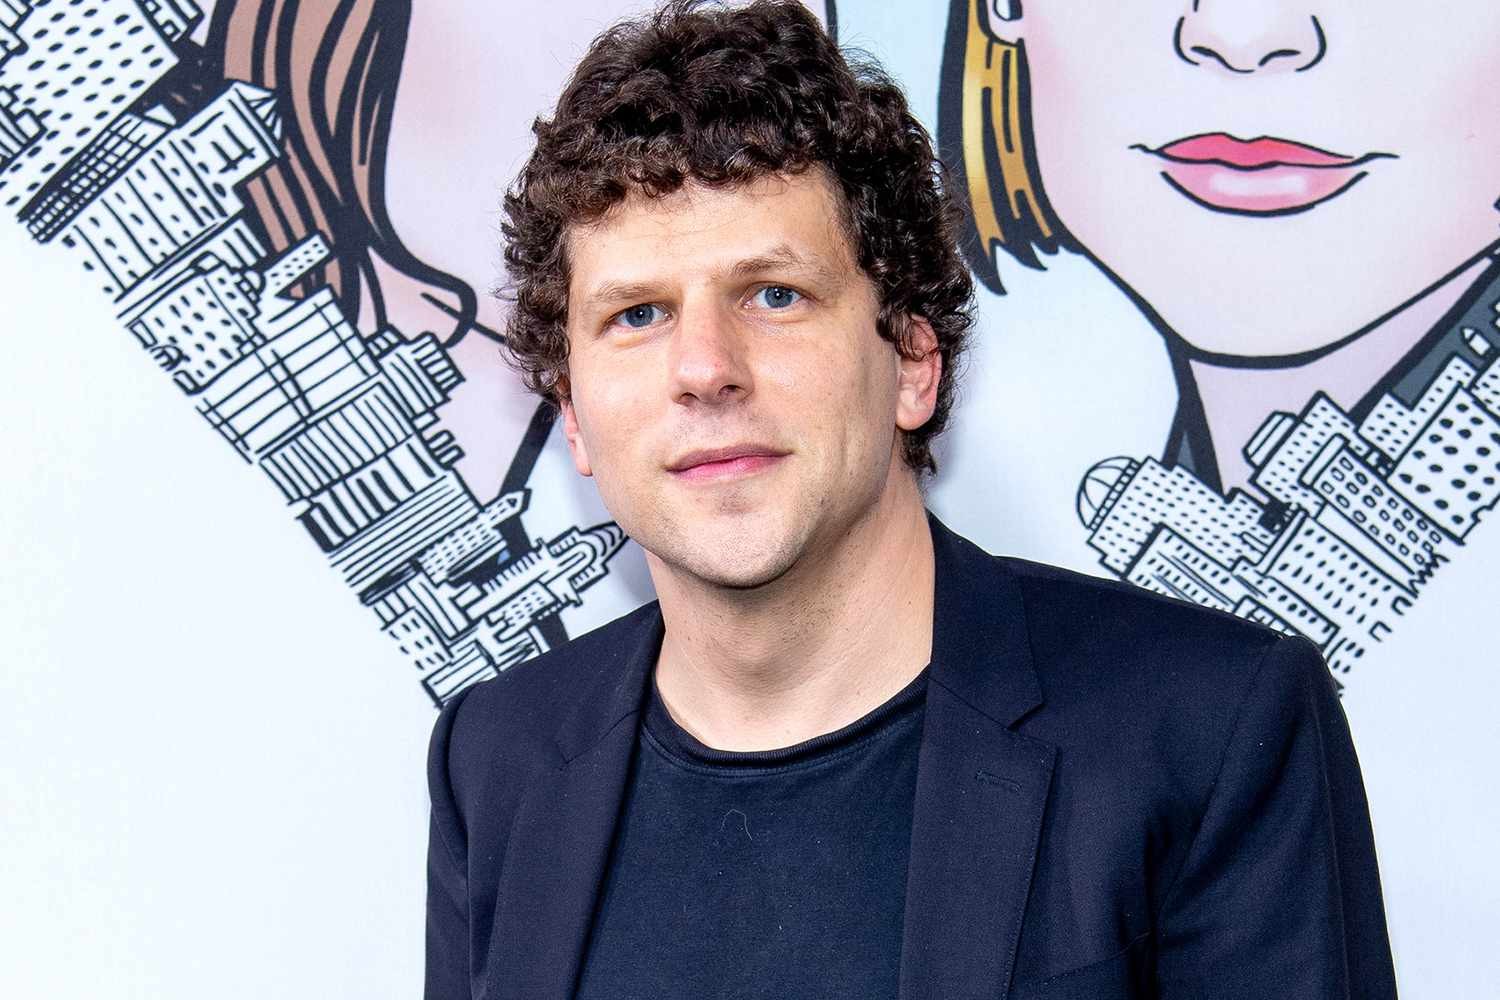 A Real Pain will be Jesse Eisenberg's second directorial film